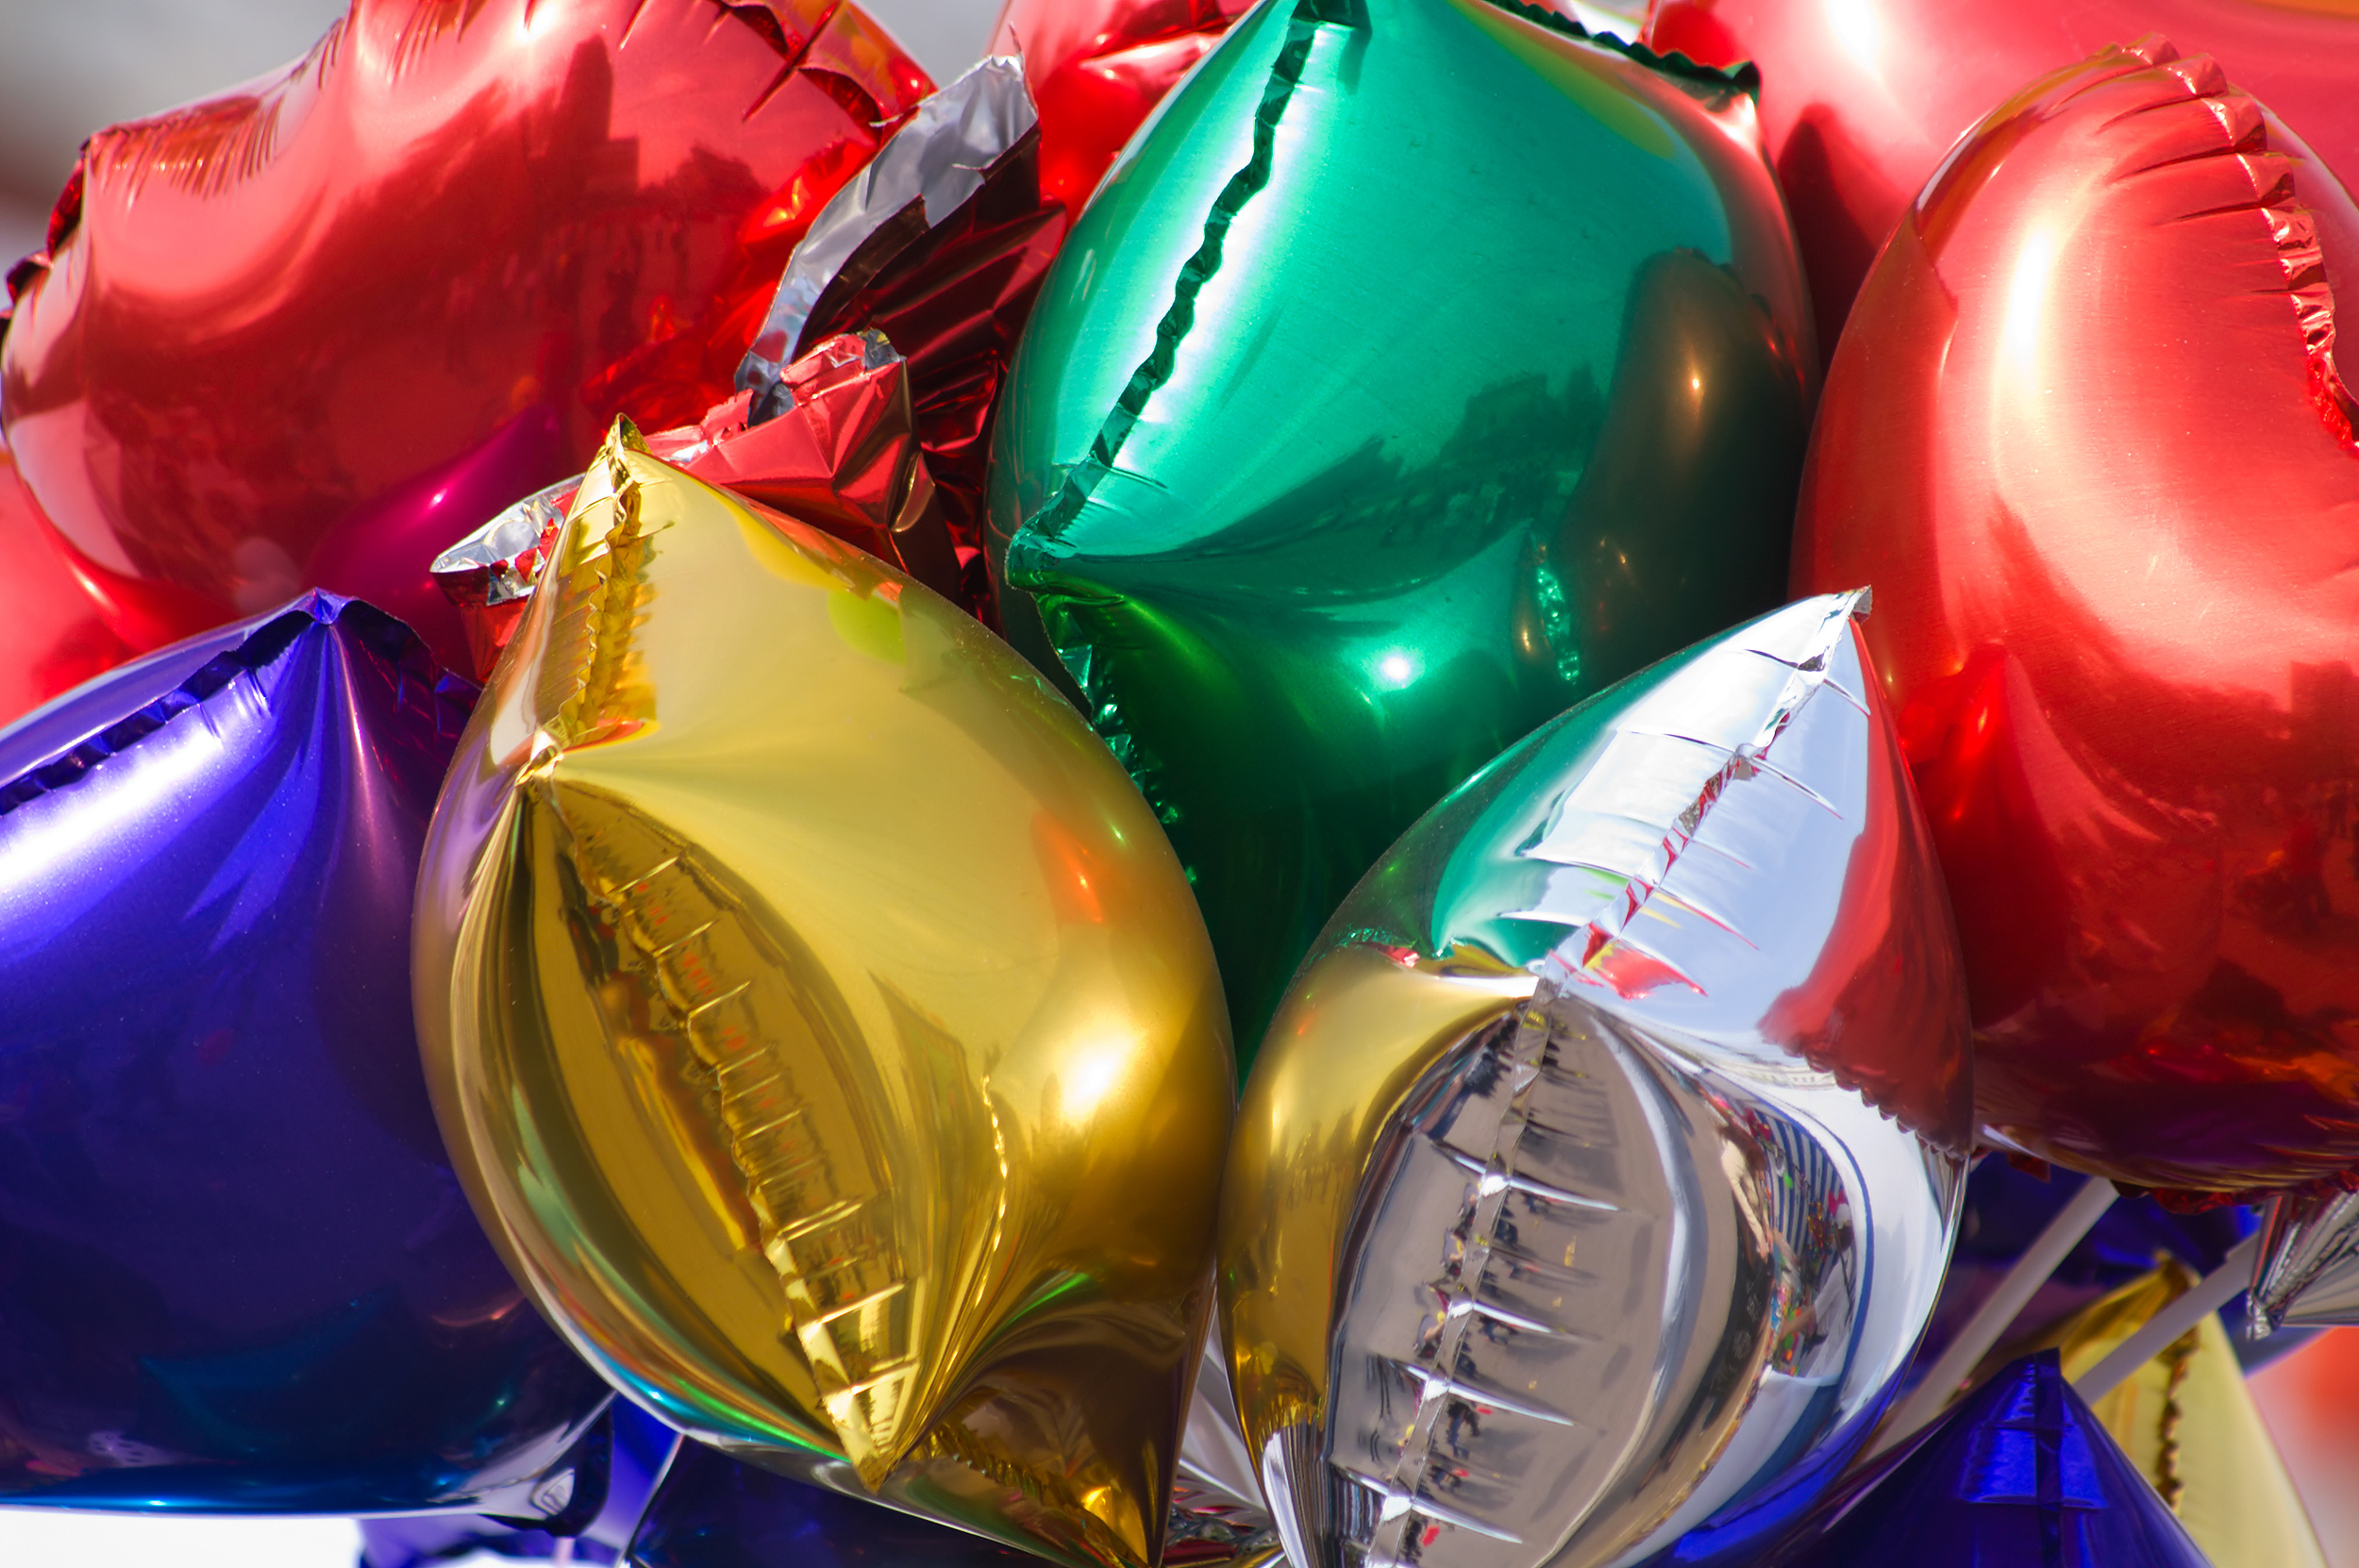 A bunch of colorful mylar balloons